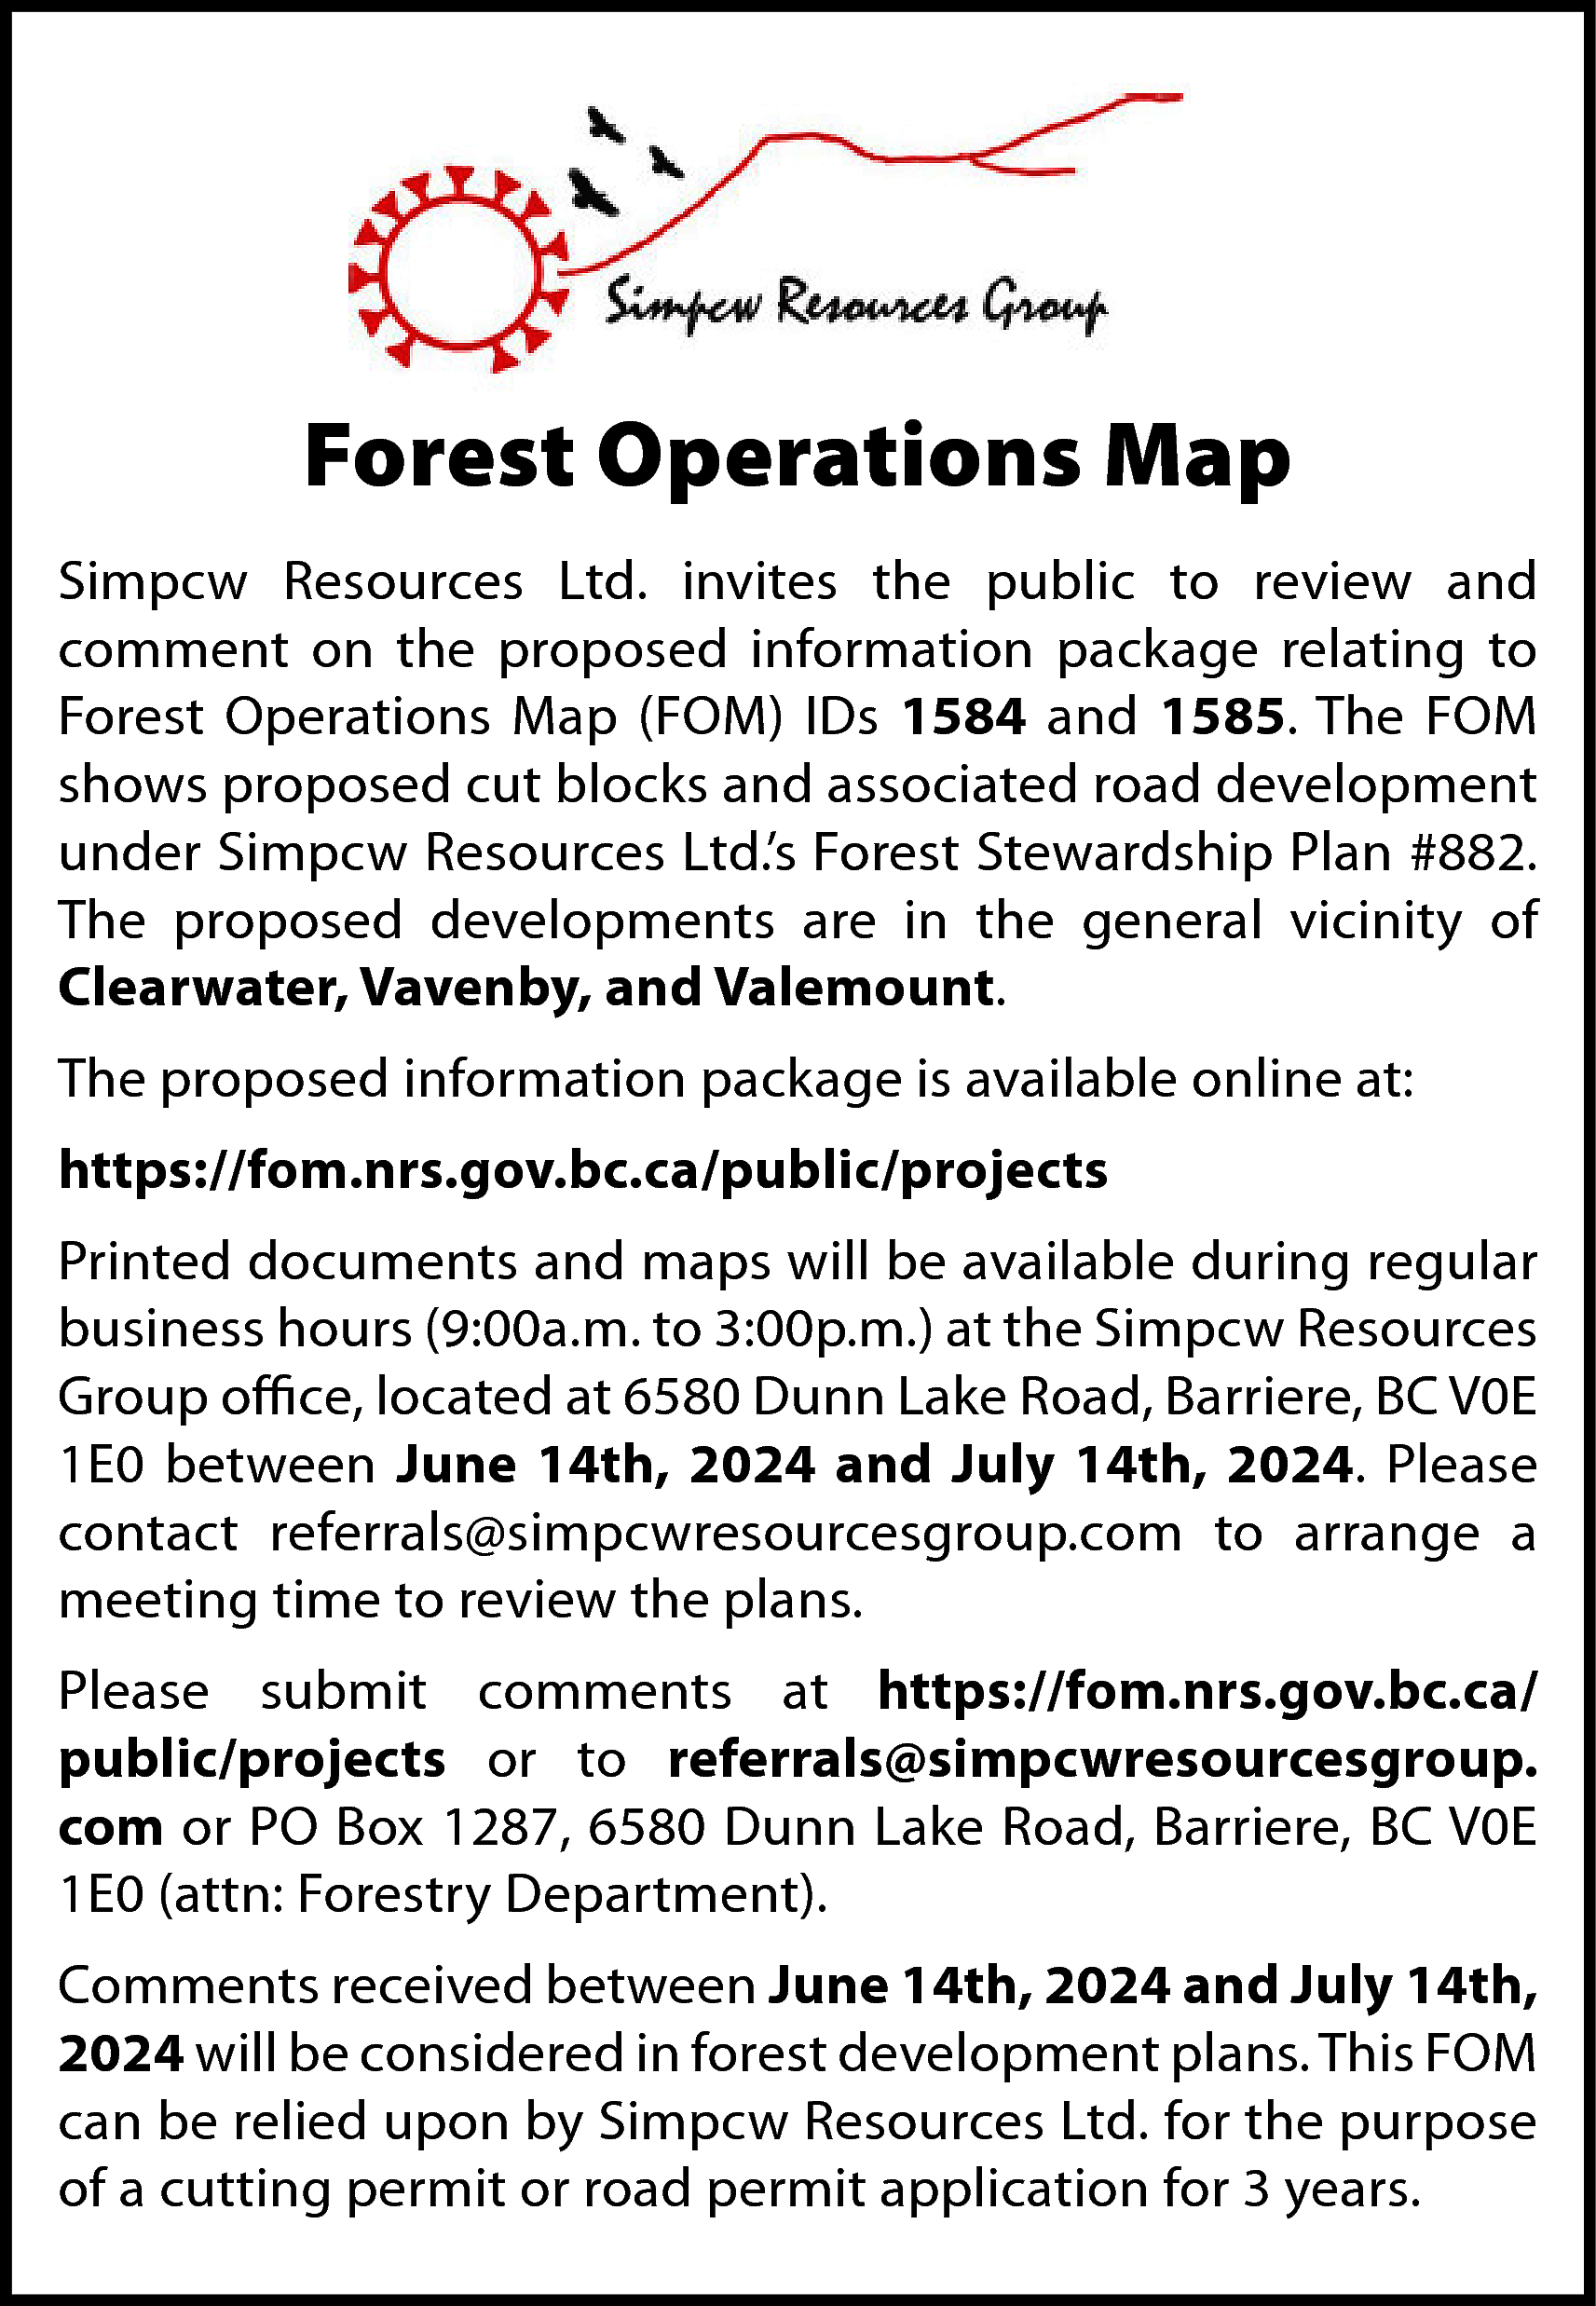 Forest Operations Map <br>Simpcw Resources  Forest Operations Map  Simpcw Resources Ltd. invites the public to review and  comment on the proposed information package relating to  Forest Operations Map (FOM) IDs 1584 and 1585. The FOM  shows proposed cut blocks and associated road development  under Simpcw Resources Ltd.’s Forest Stewardship Plan #882.  The proposed developments are in the general vicinity of  Clearwater, Vavenby, and Valemount.  The proposed information package is available online at:  https://fom.nrs.gov.bc.ca/public/projects  Printed documents and maps will be available during regular  business hours (9:00a.m. to 3:00p.m.) at the Simpcw Resources  Group office, located at 6580 Dunn Lake Road, Barriere, BC V0E  1E0 between June 14th, 2024 and July 14th, 2024. Please  contact referrals@simpcwresourcesgroup.com to arrange a  meeting time to review the plans.  Please submit comments at https://fom.nrs.gov.bc.ca/  public/projects or to referrals@simpcwresourcesgroup.  com or PO Box 1287, 6580 Dunn Lake Road, Barriere, BC V0E  1E0 (attn: Forestry Department).  Comments received between June 14th, 2024 and July 14th,  2024 will be considered in forest development plans. This FOM  can be relied upon by Simpcw Resources Ltd. for the purpose  of a cutting permit or road permit application for 3 years.    